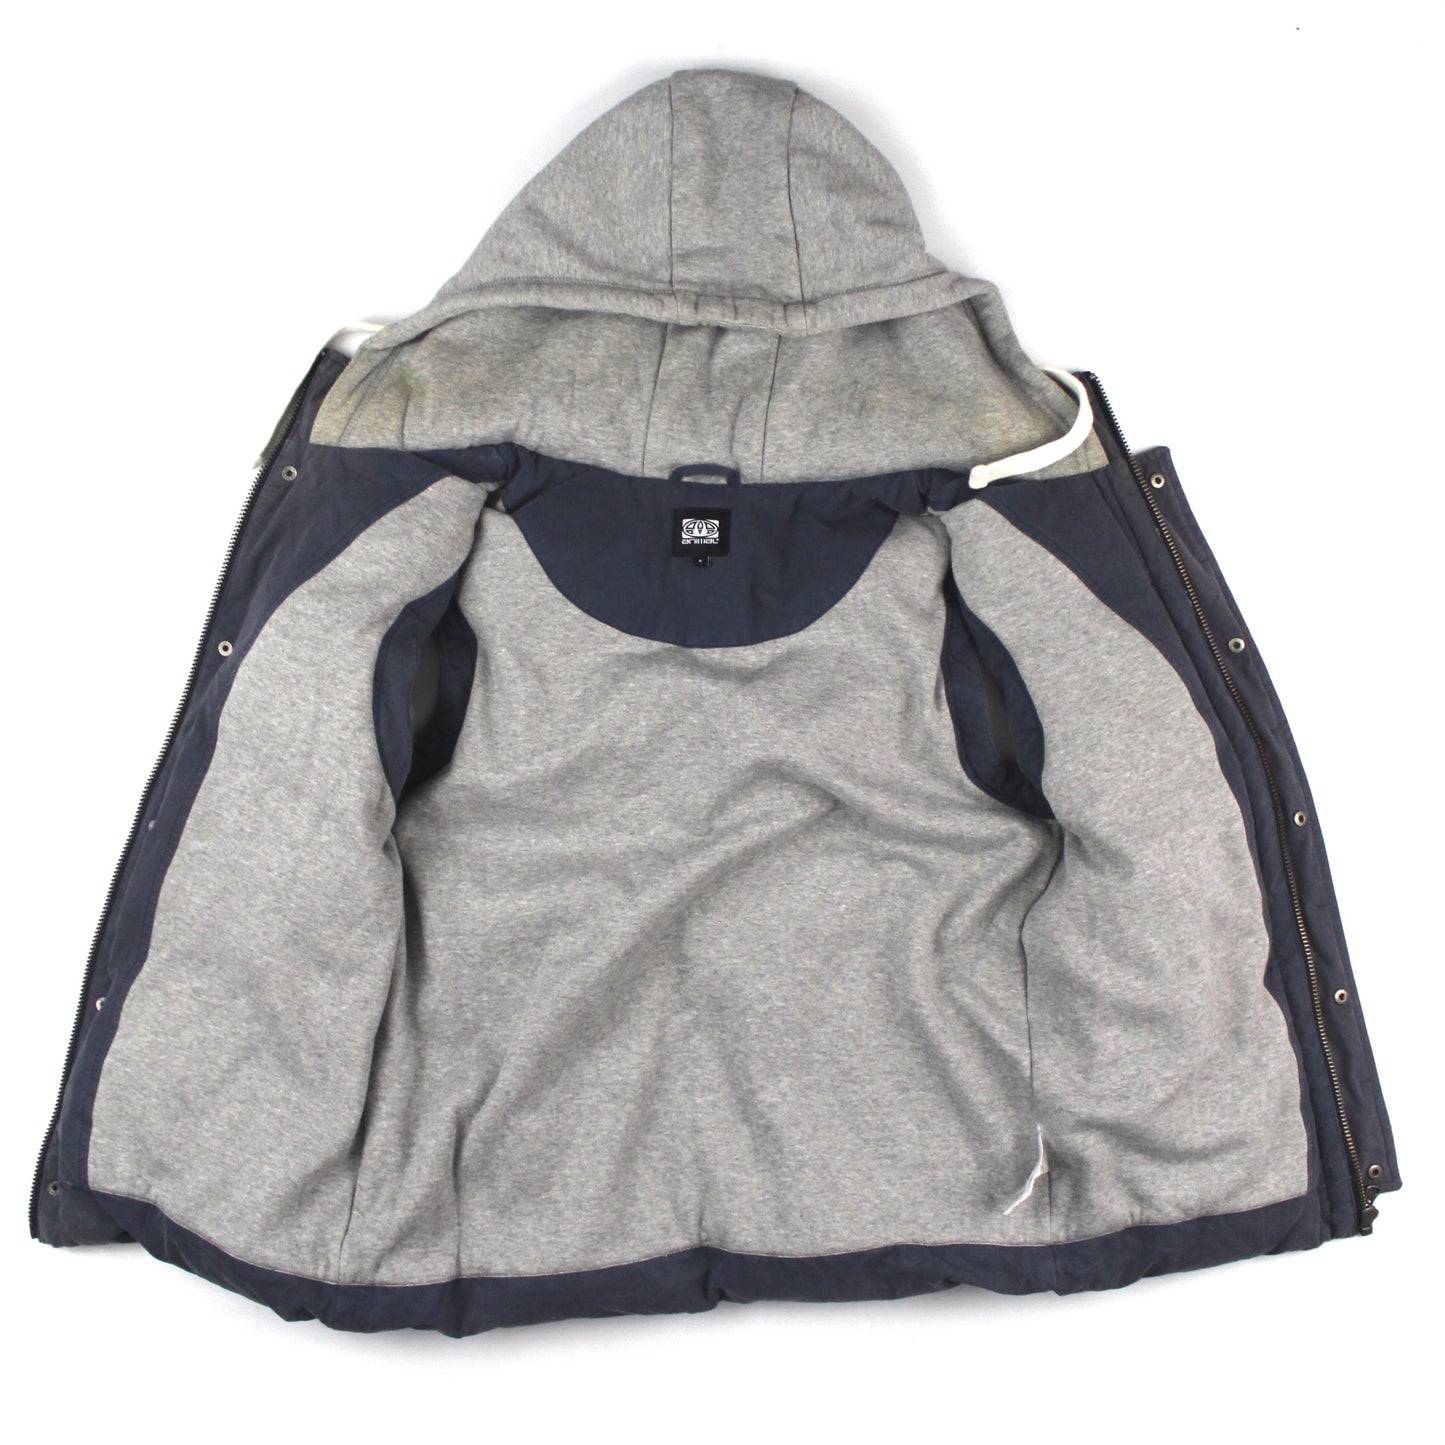 Hooded Body Warmer / Gilet by Animal (S)